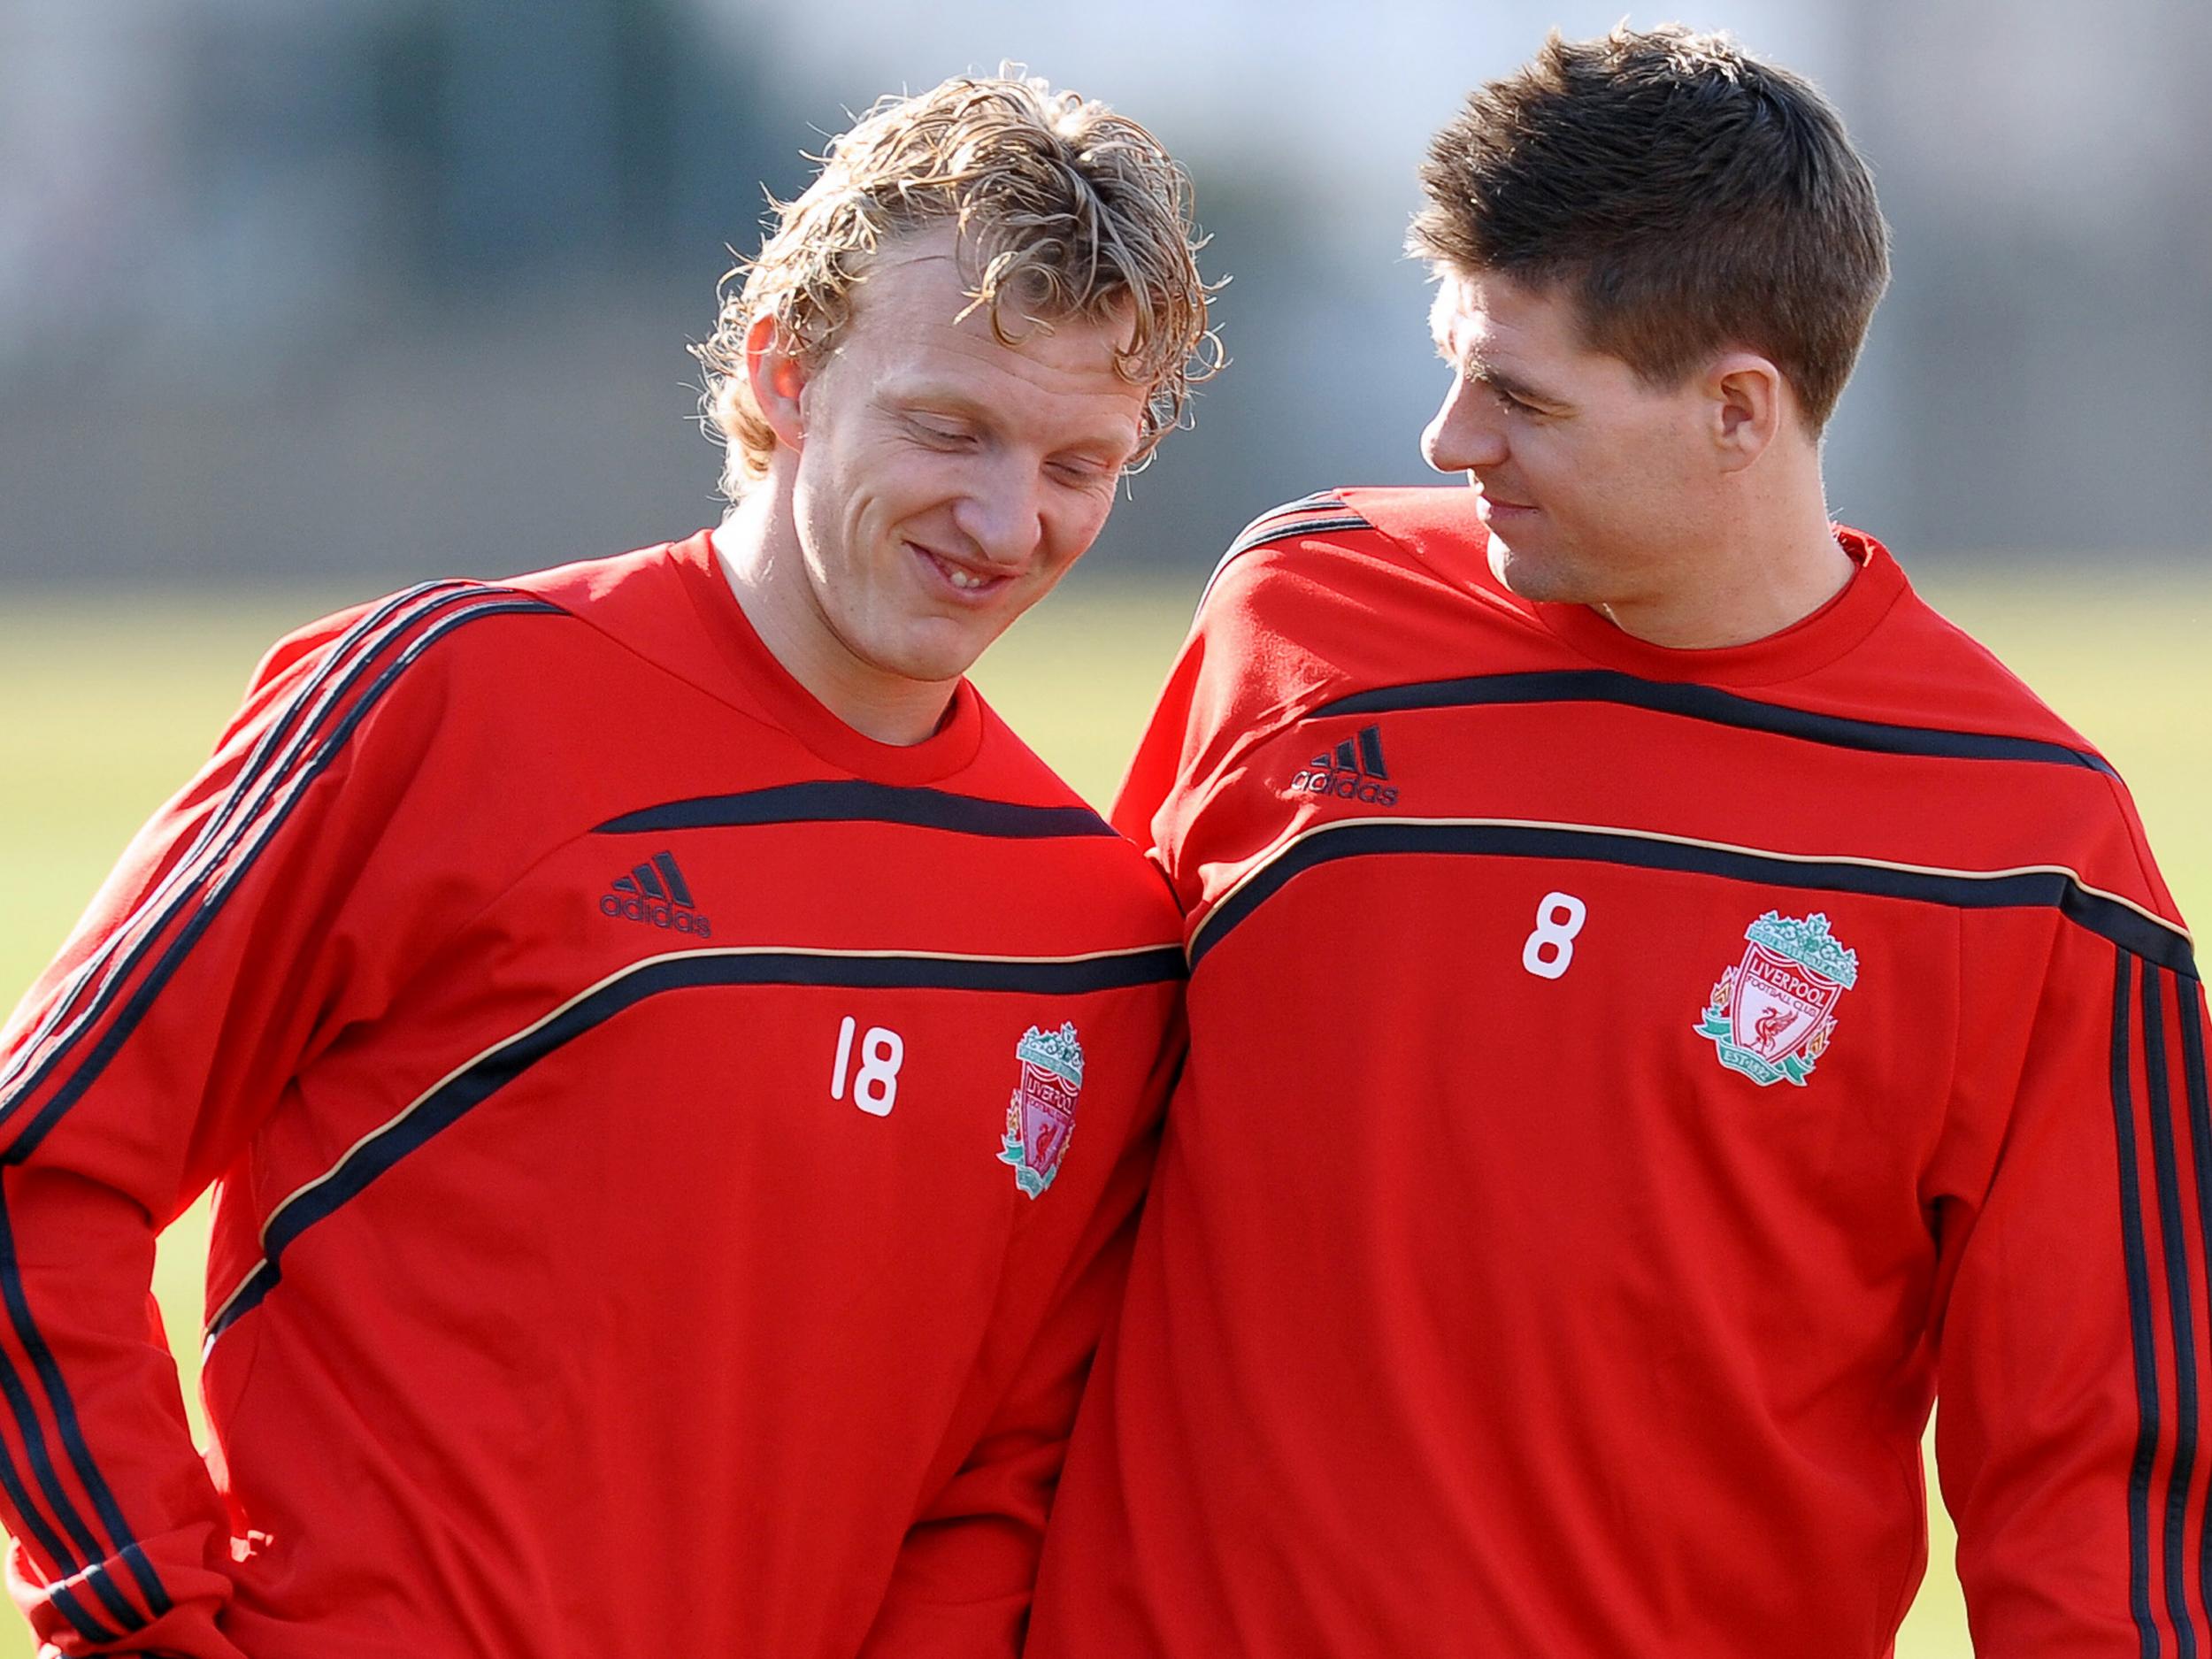 Gerrard was Kuyt's captain while the pair were at Anfield together